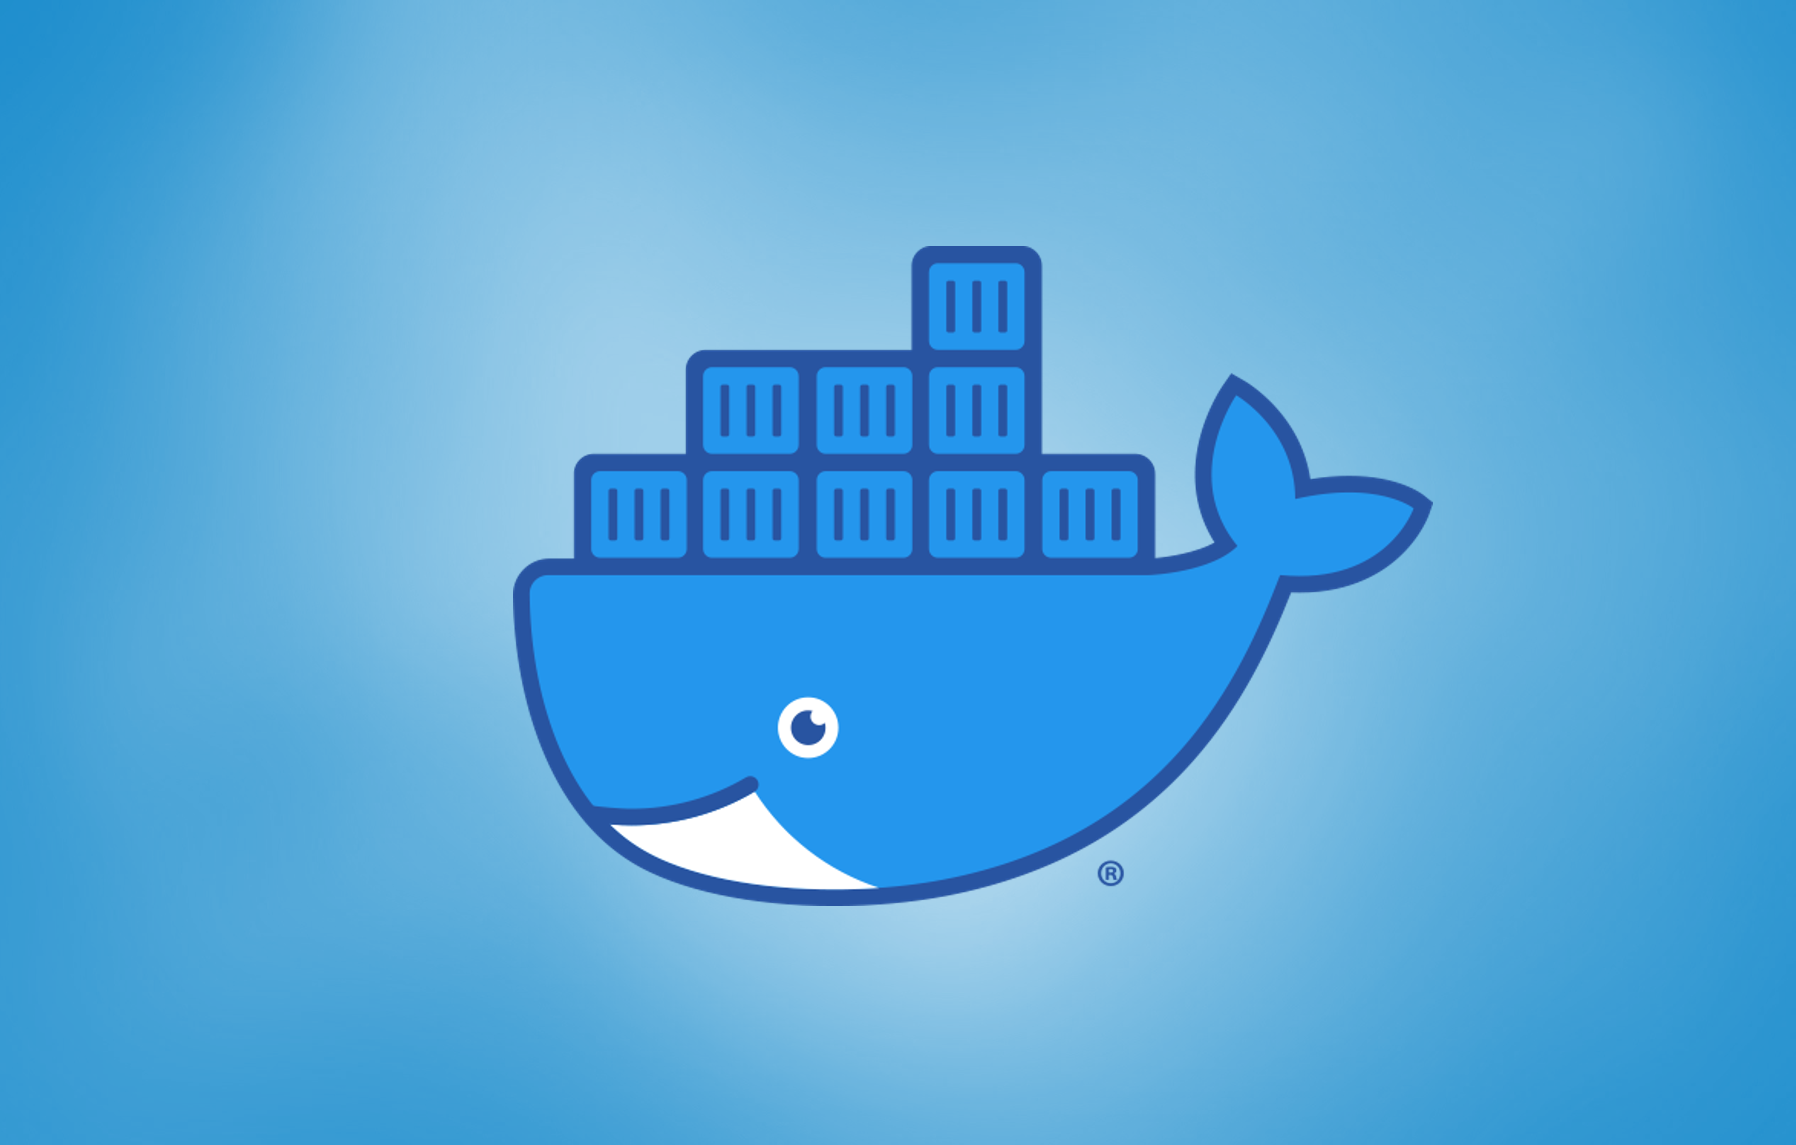 Docker image is a read-only template that contains instructions for creating a Docker container. It is a snapshot of a Docker container. In this tutorial, you will learn about Docker images and containers.